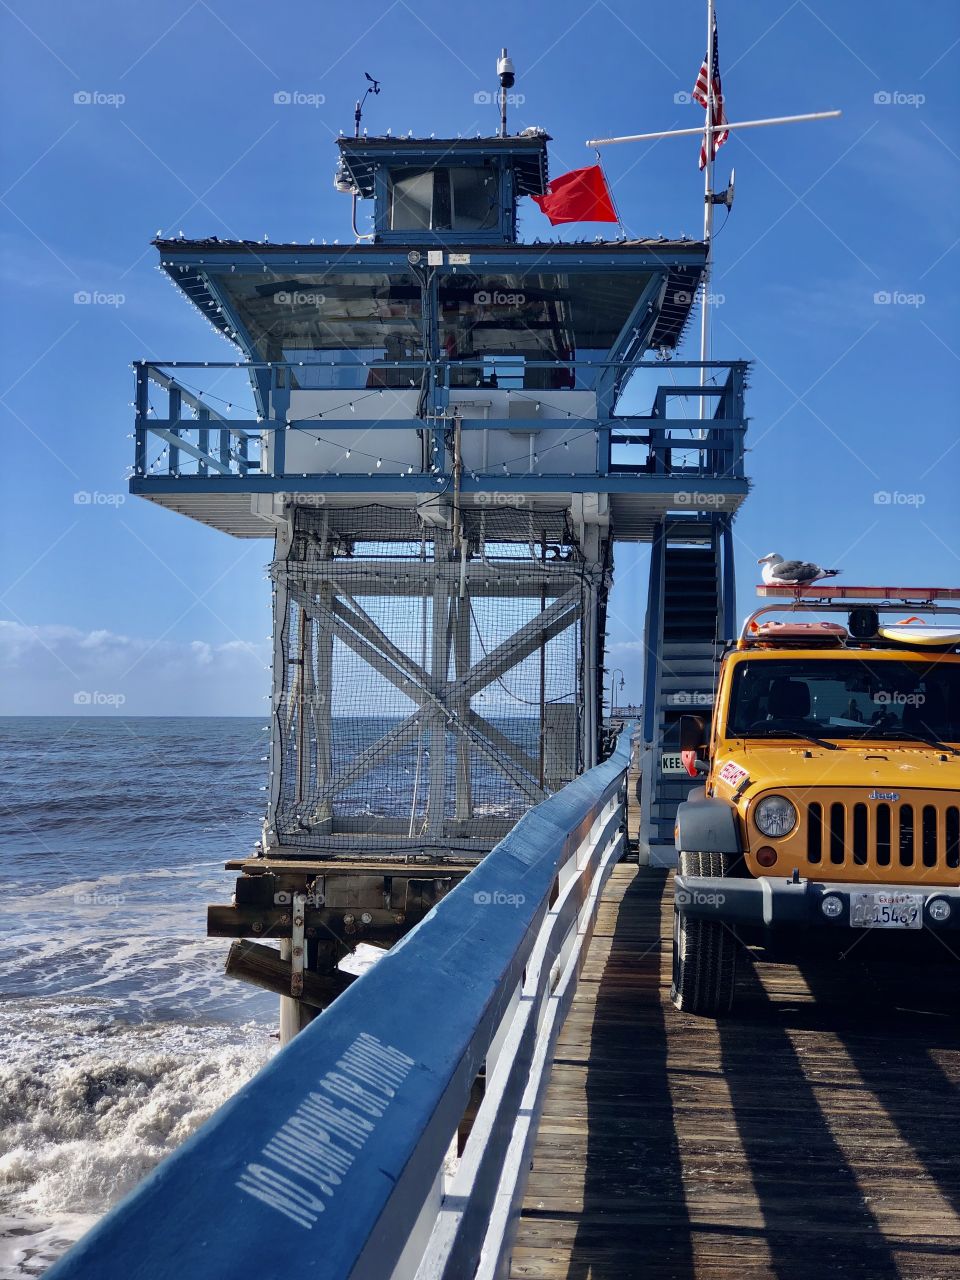 Foap Mission Vertical Captures! Lifeguard Jeep With A Seagulls on the San Clemente Pier On The Southern California Coast!